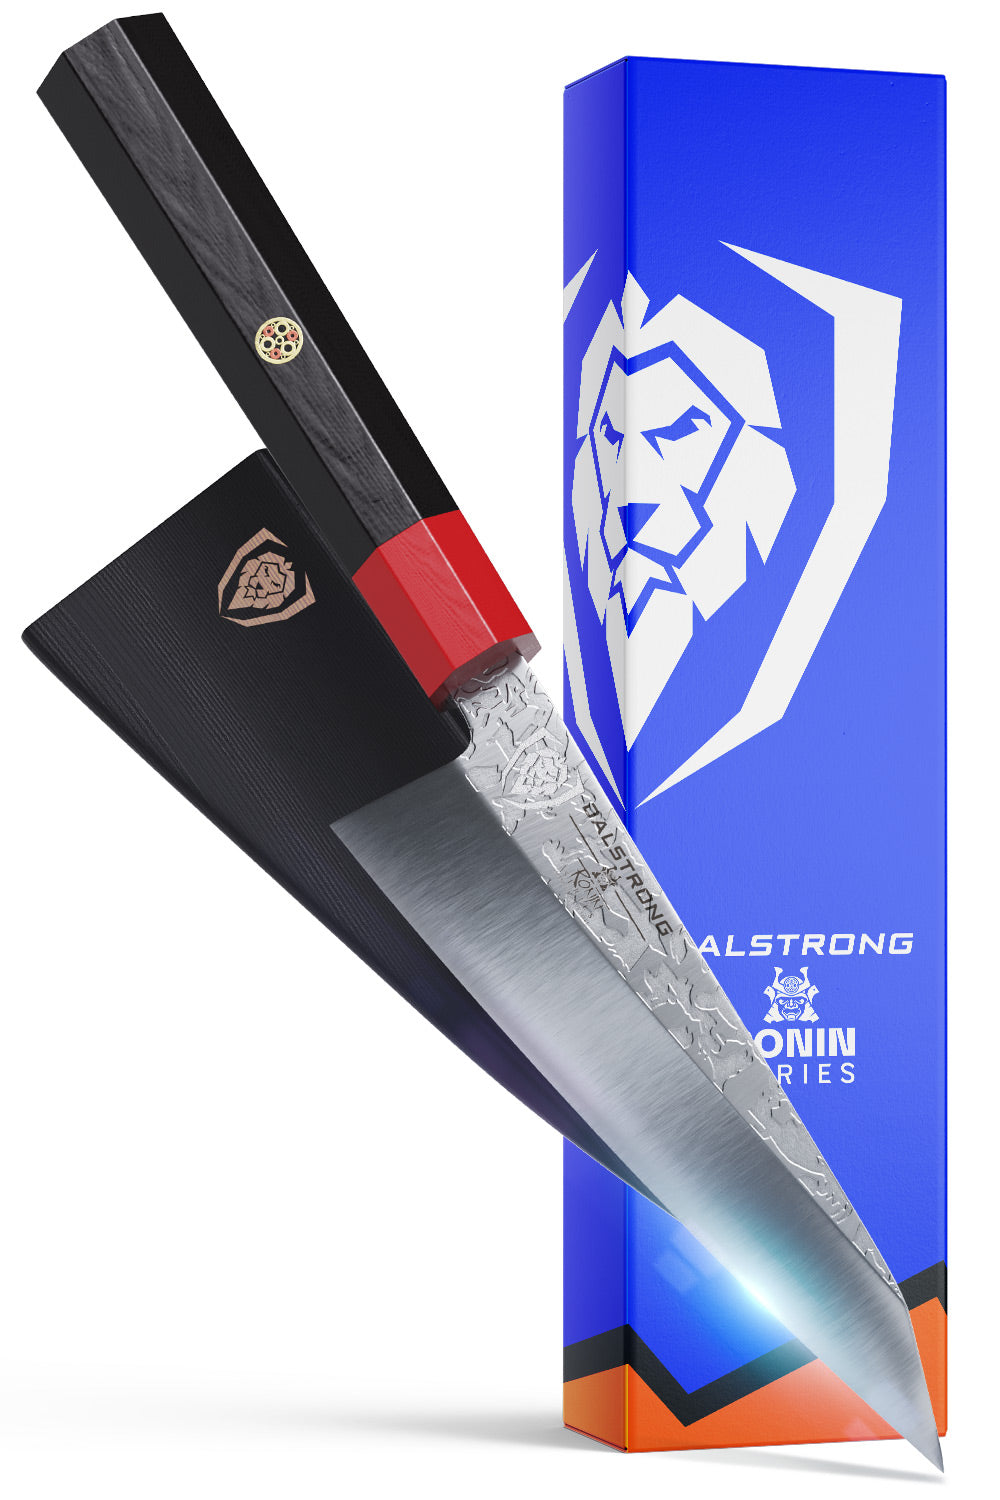 Dalstrong ronin series 5.5 inch honesuki knife with black handle in front of it's premium packaging.